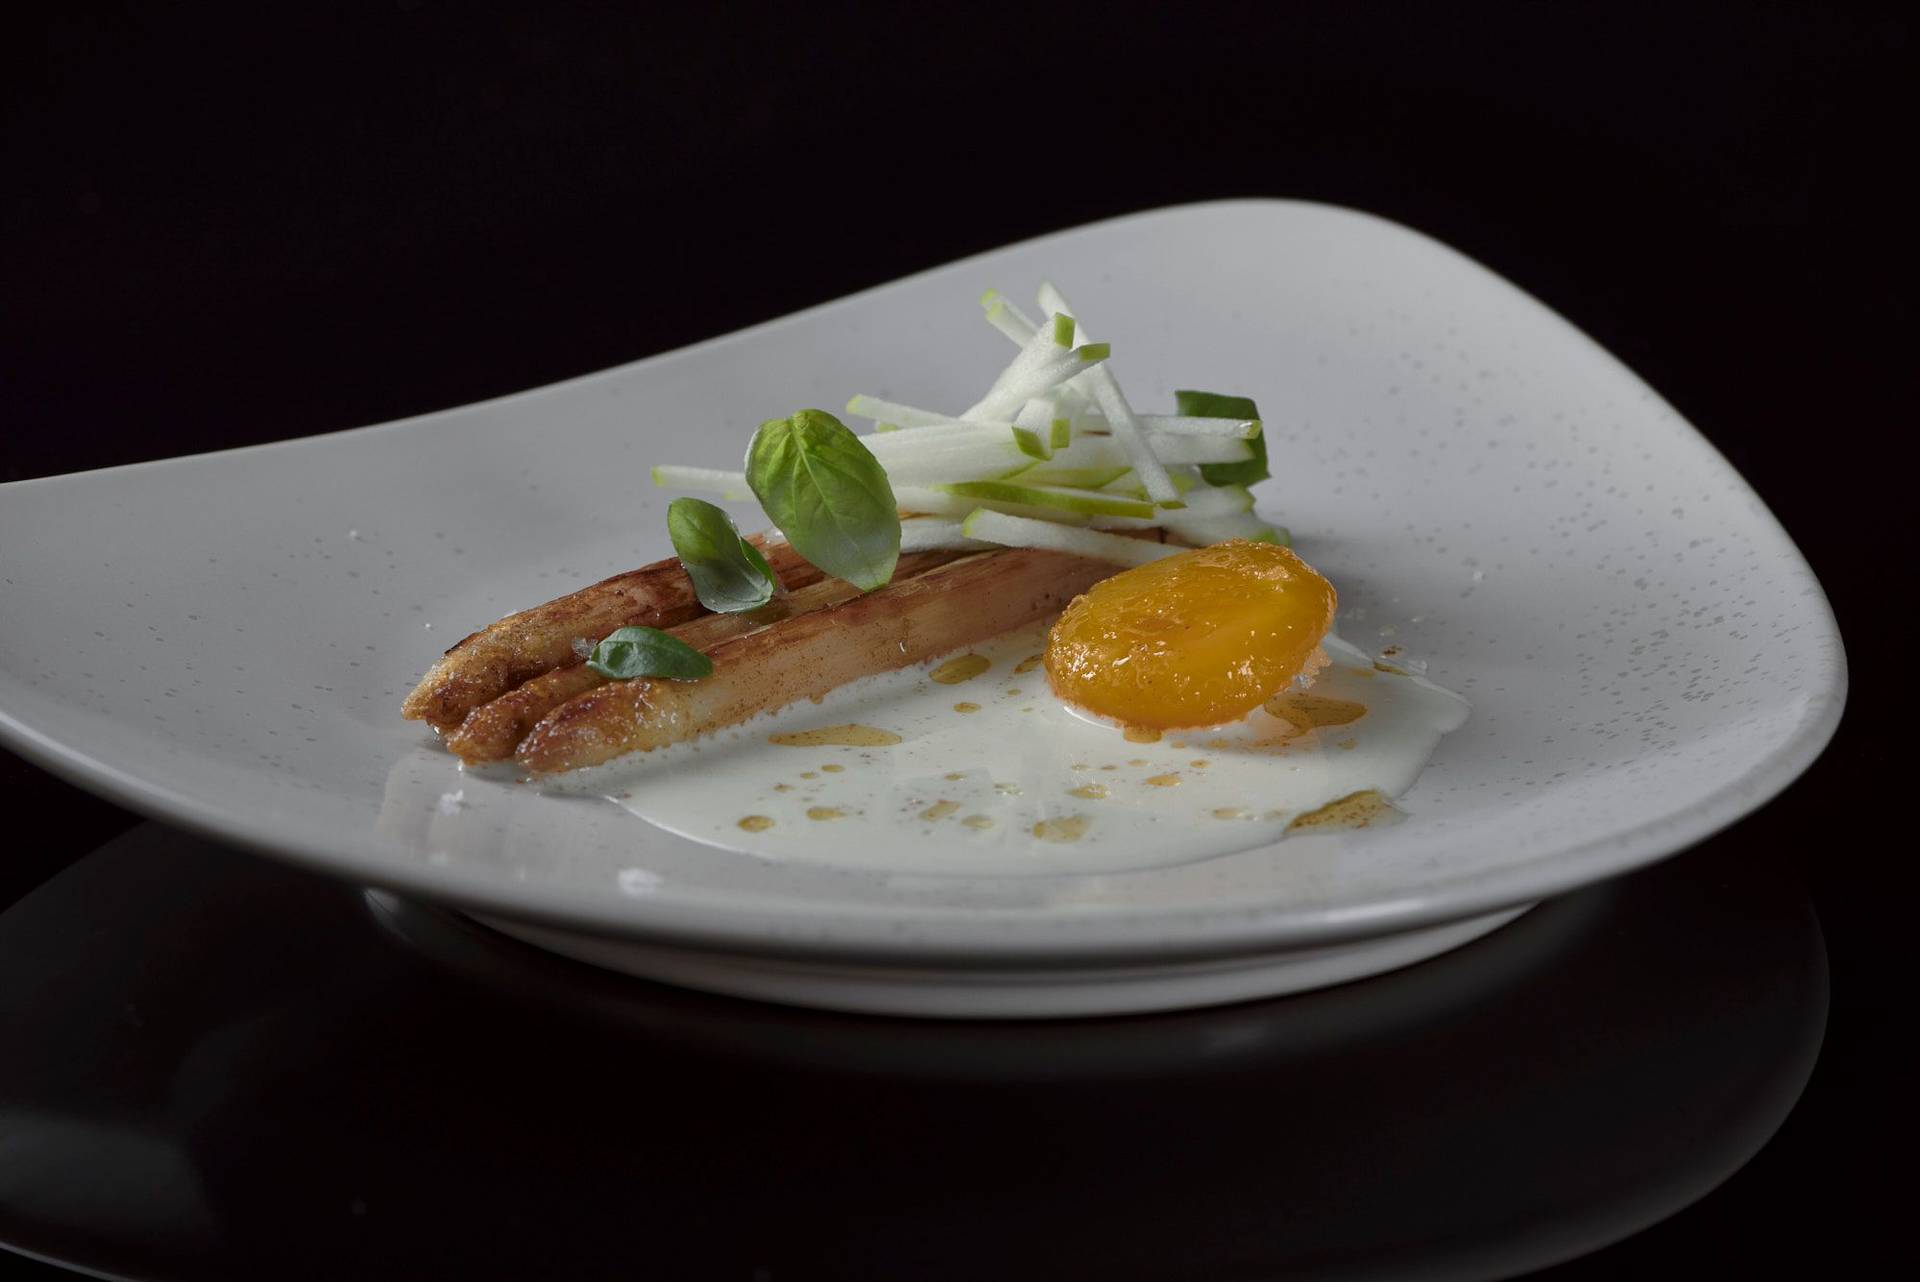 roasted white asparagus with cured egg yolk basil and green apple on a beige plate with black background